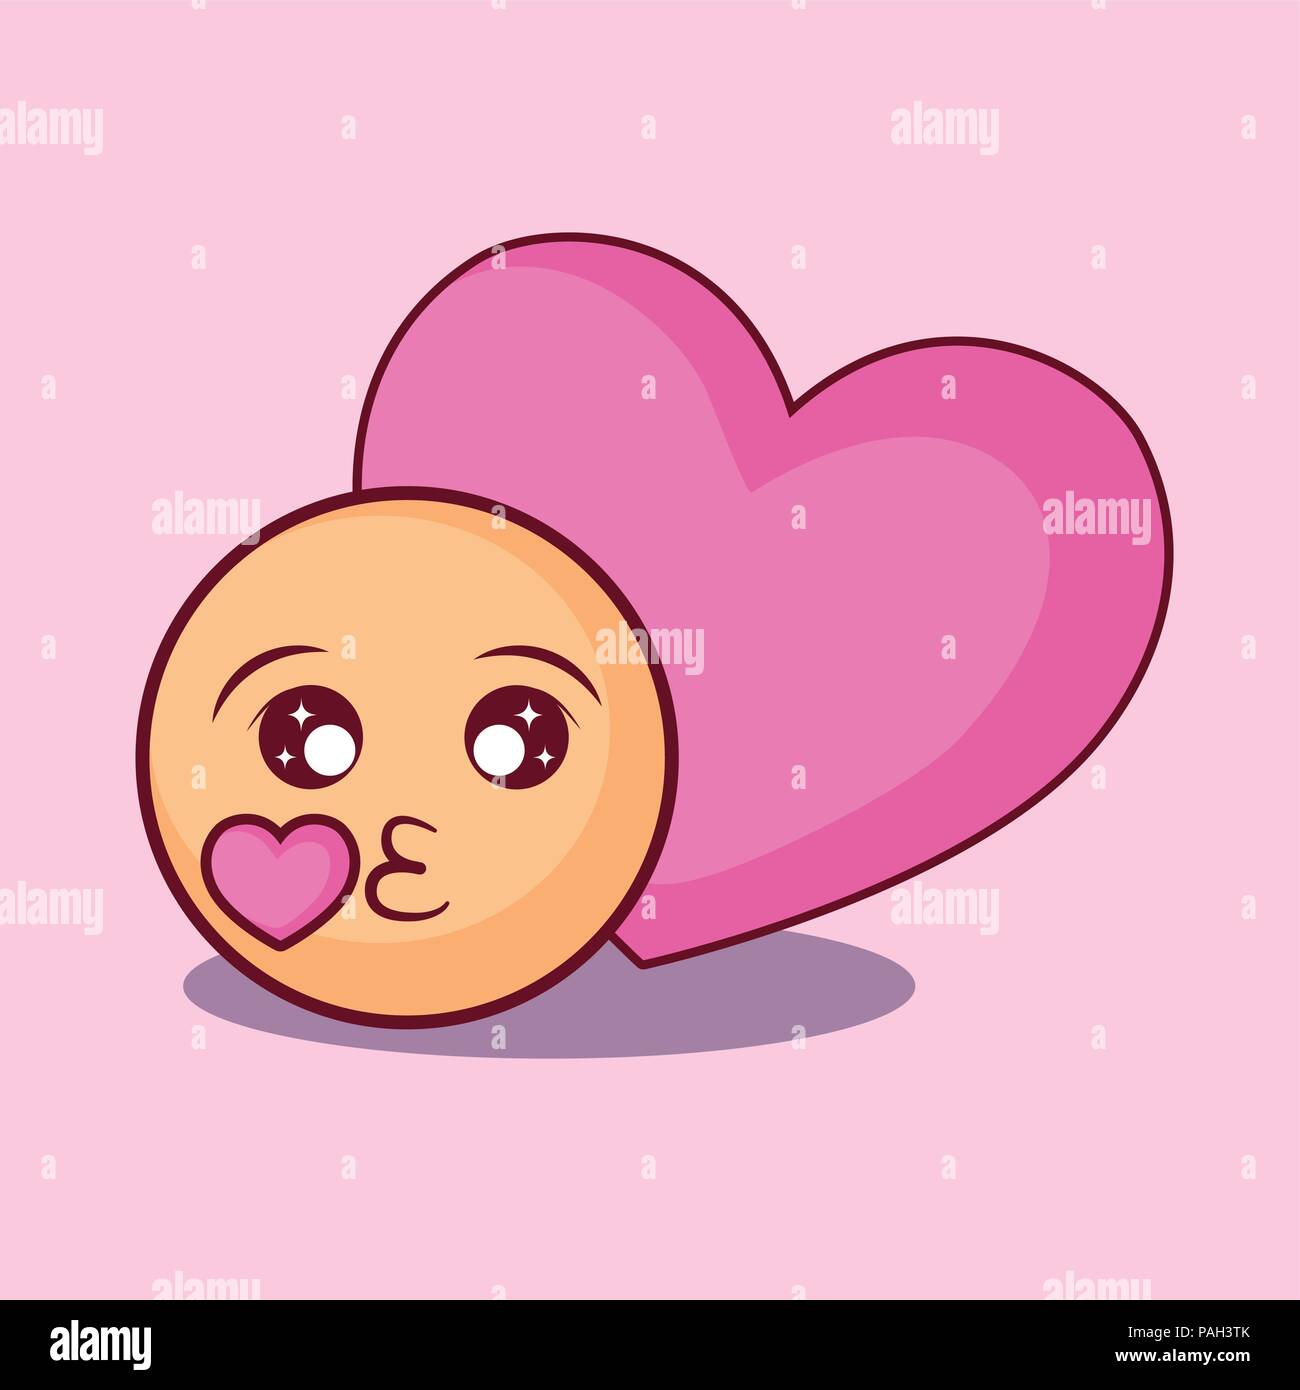 Online dating design with kiss emoji and heart over pink background, colorful design. vector illustration Stock Vector